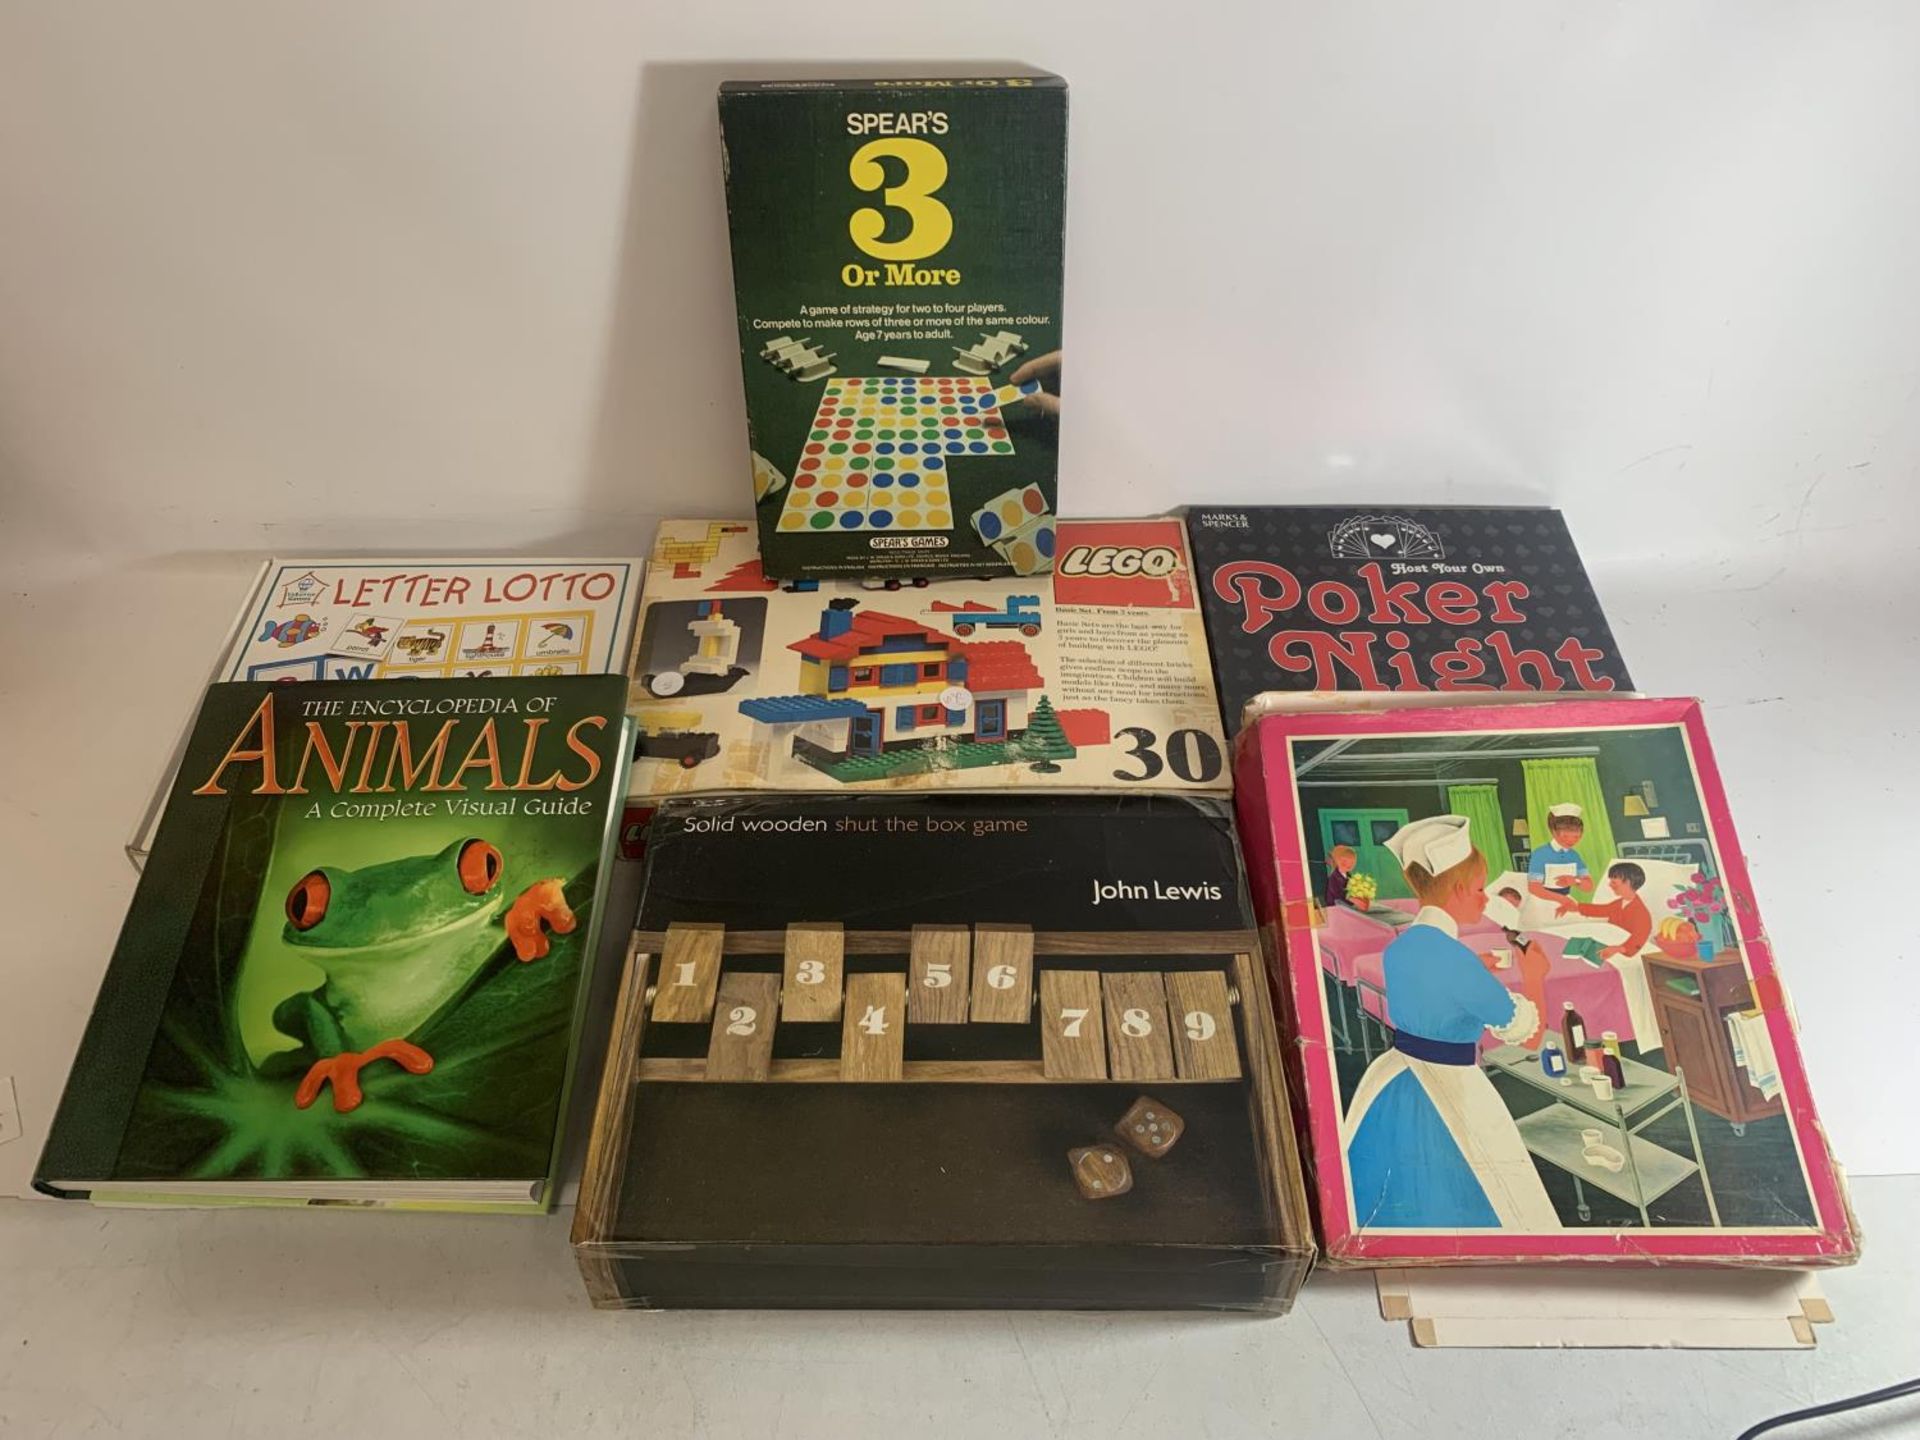 A QUANTITY OF BOXED VINTAGE GAMES TO INCLUDE A LEGO BASIC SET, LETTER LOTTO, POKER NIGHT, SHUT THE